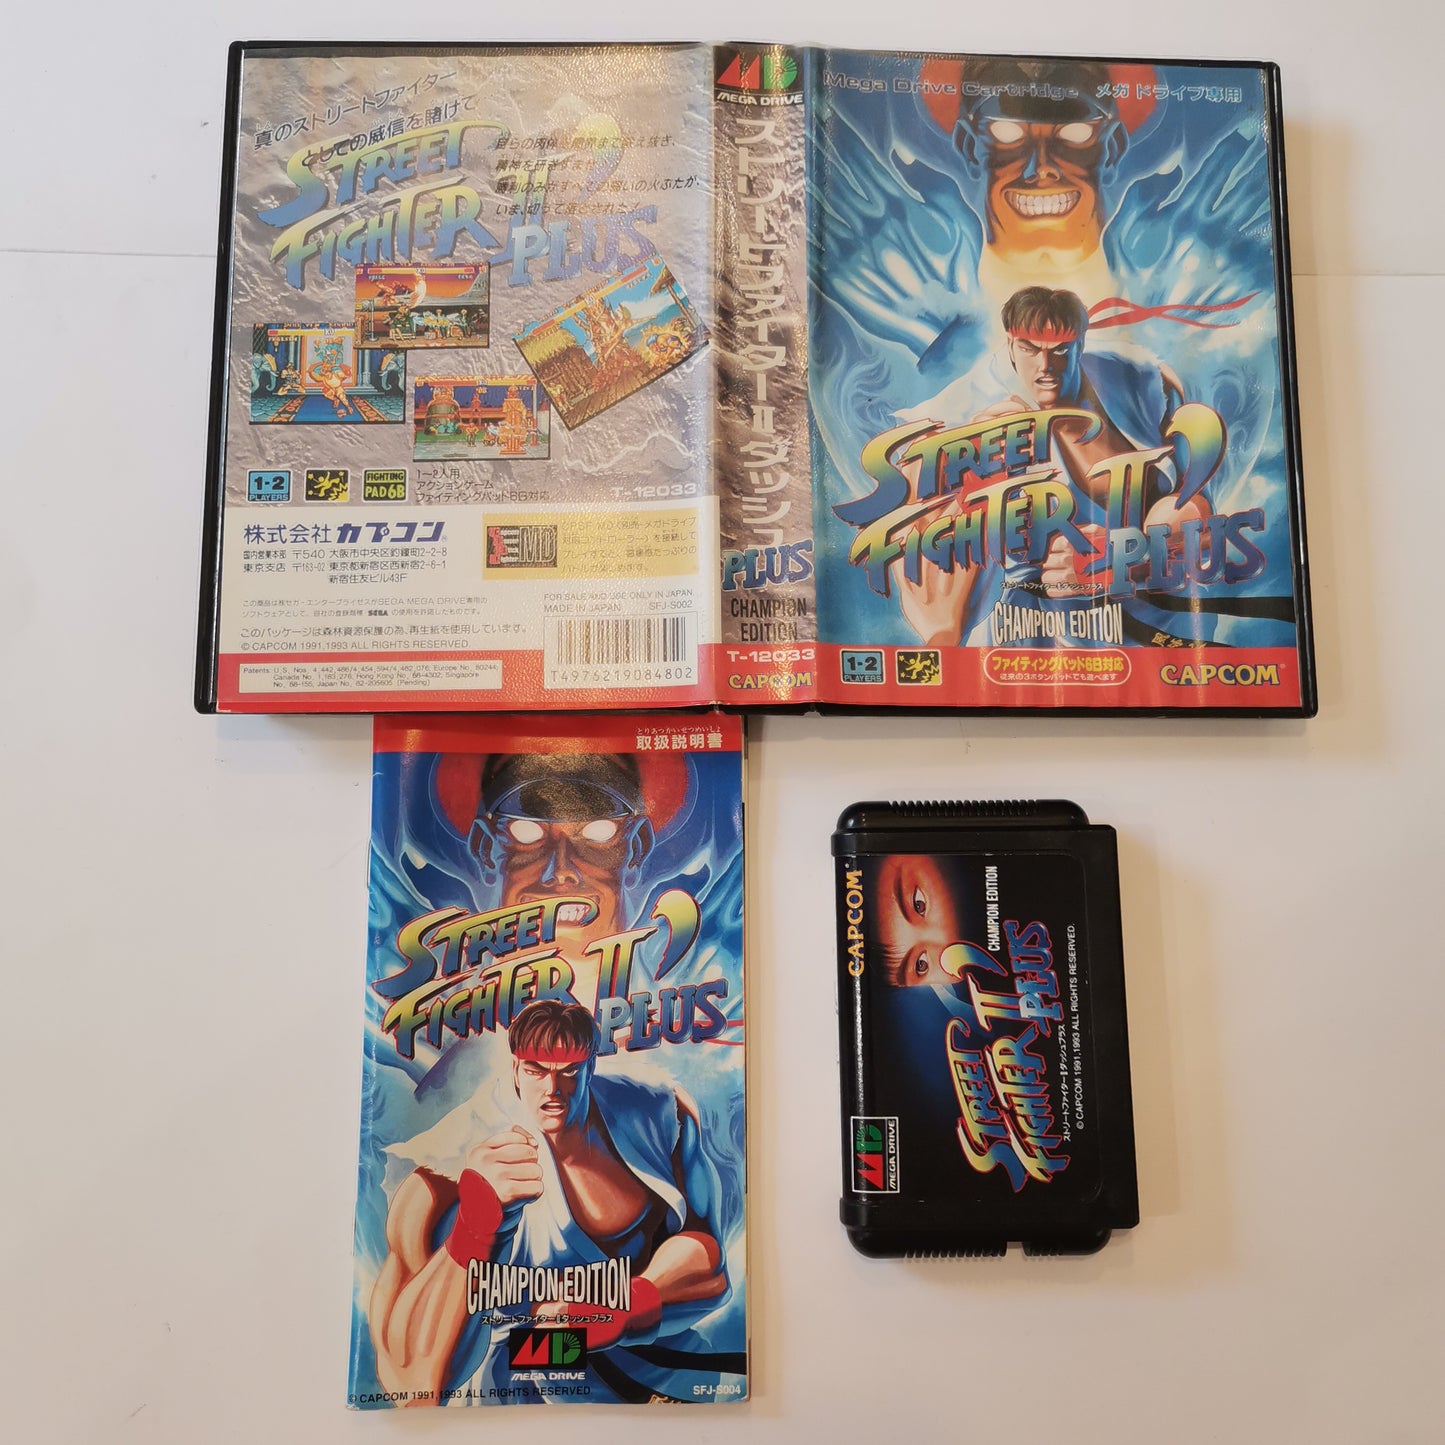 Street Fighter 2 Plus (with original names)